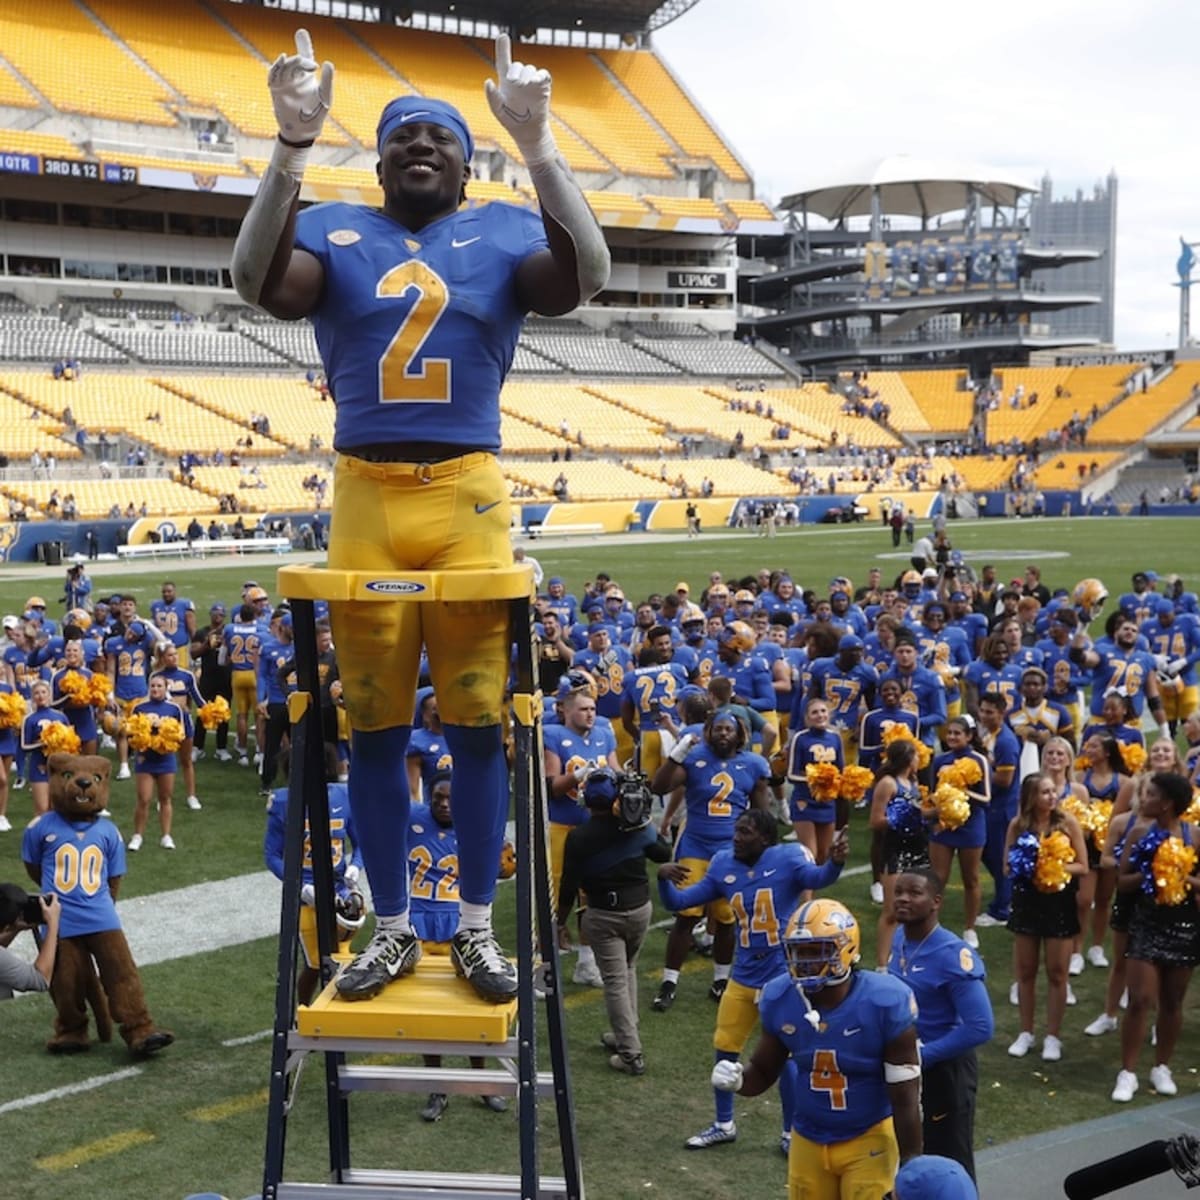 Pitt's Fall Rise Showing in National Polls - Pitt Panthers #H2P